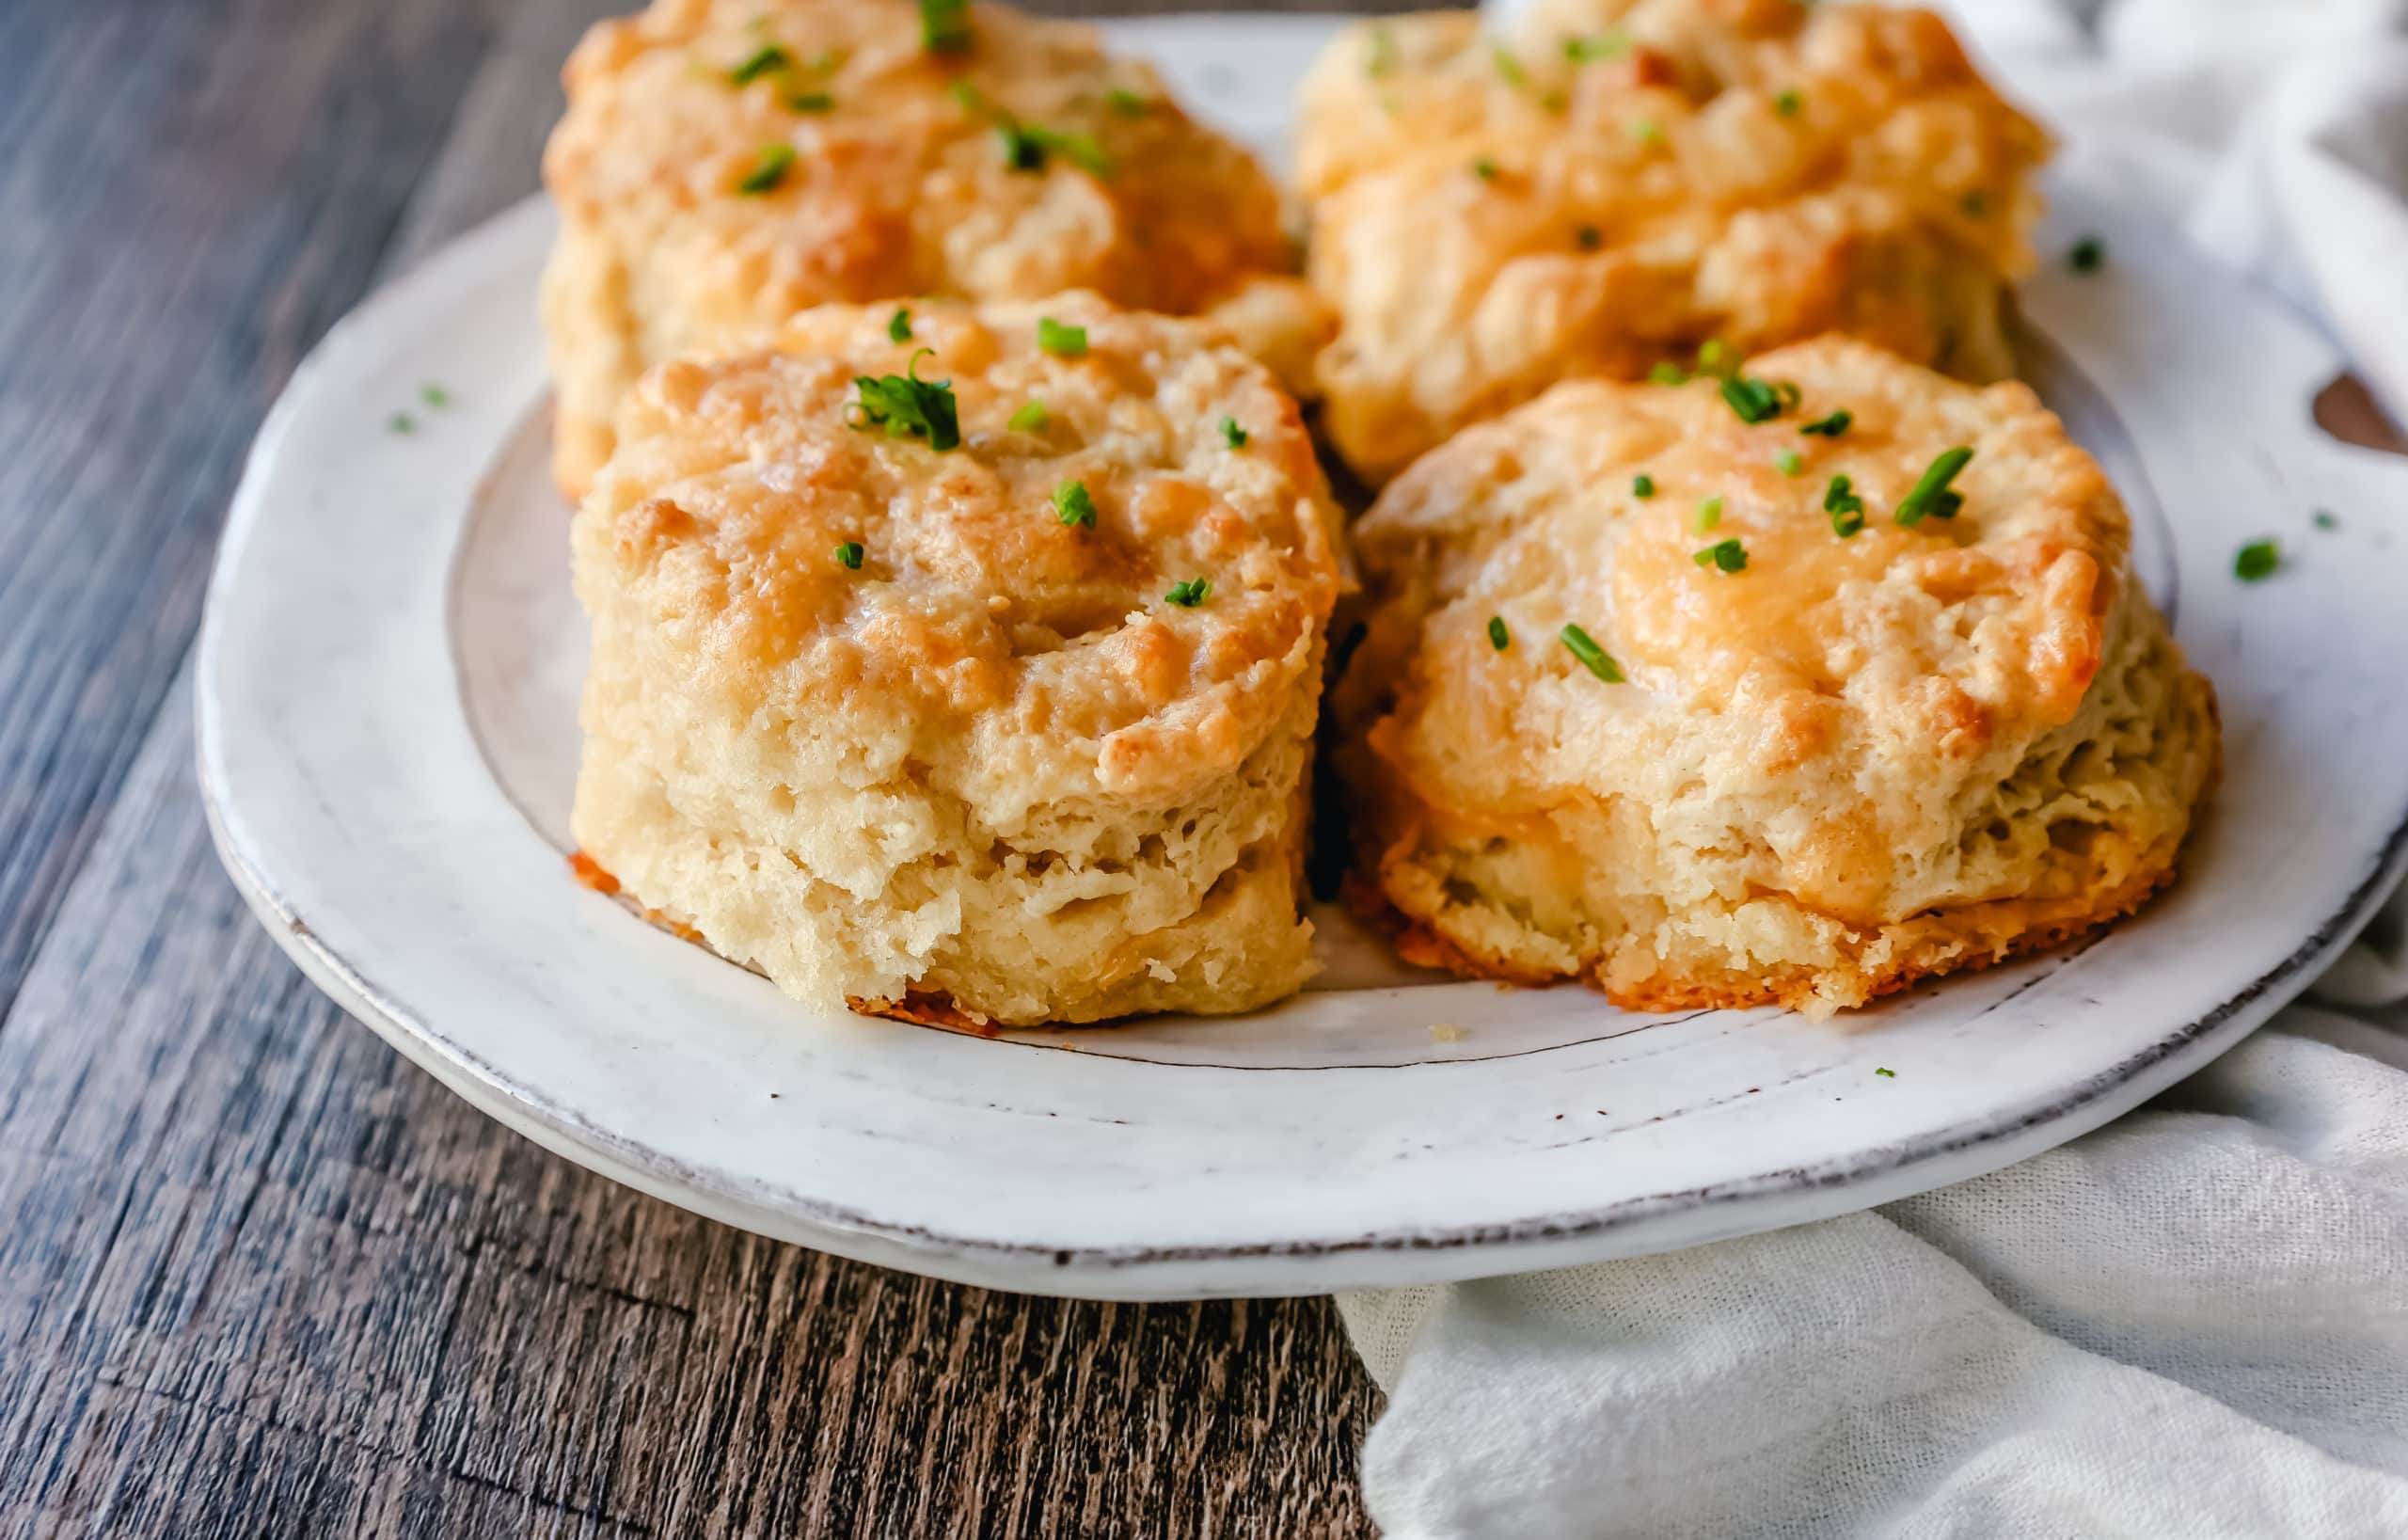 Homemade Cheesy Garlic Biscuits Light, fluffy, buttery homemade biscuits with cheddar cheese and garlic. These are the perfect homemade biscuit!